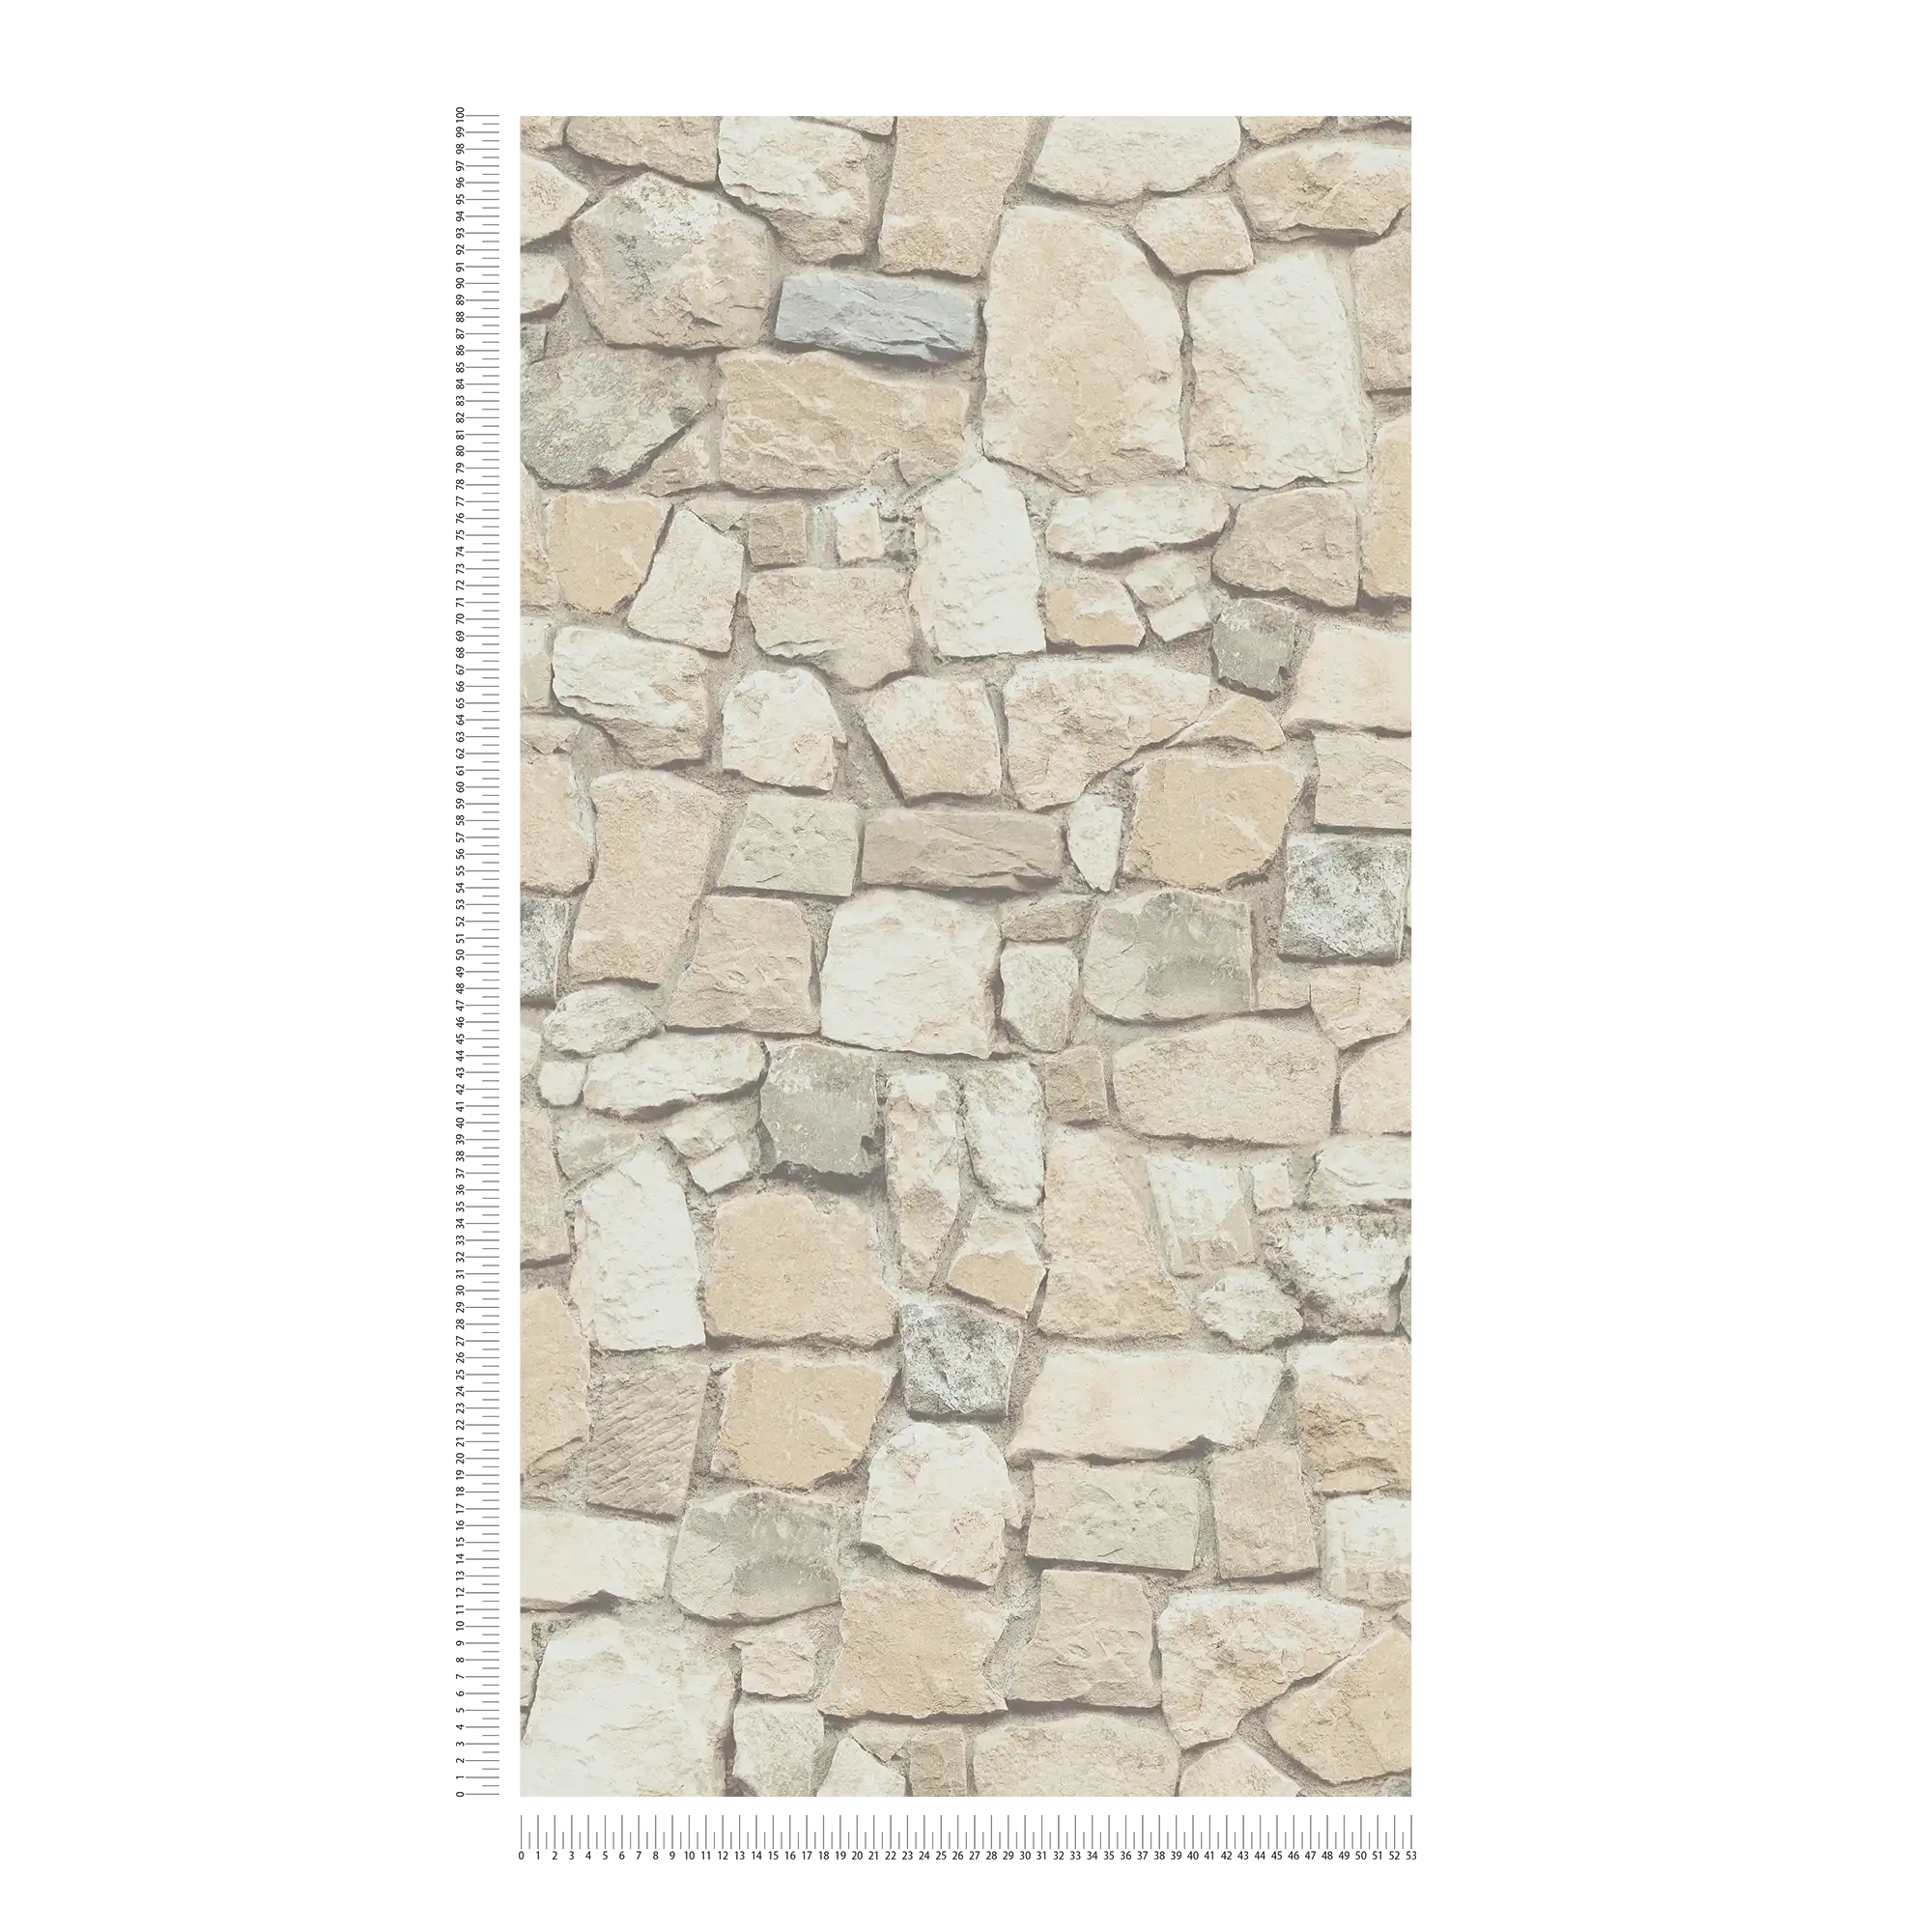             Self-adhesive wallpaper | natural stone look with 3D effect - beige, cream
        